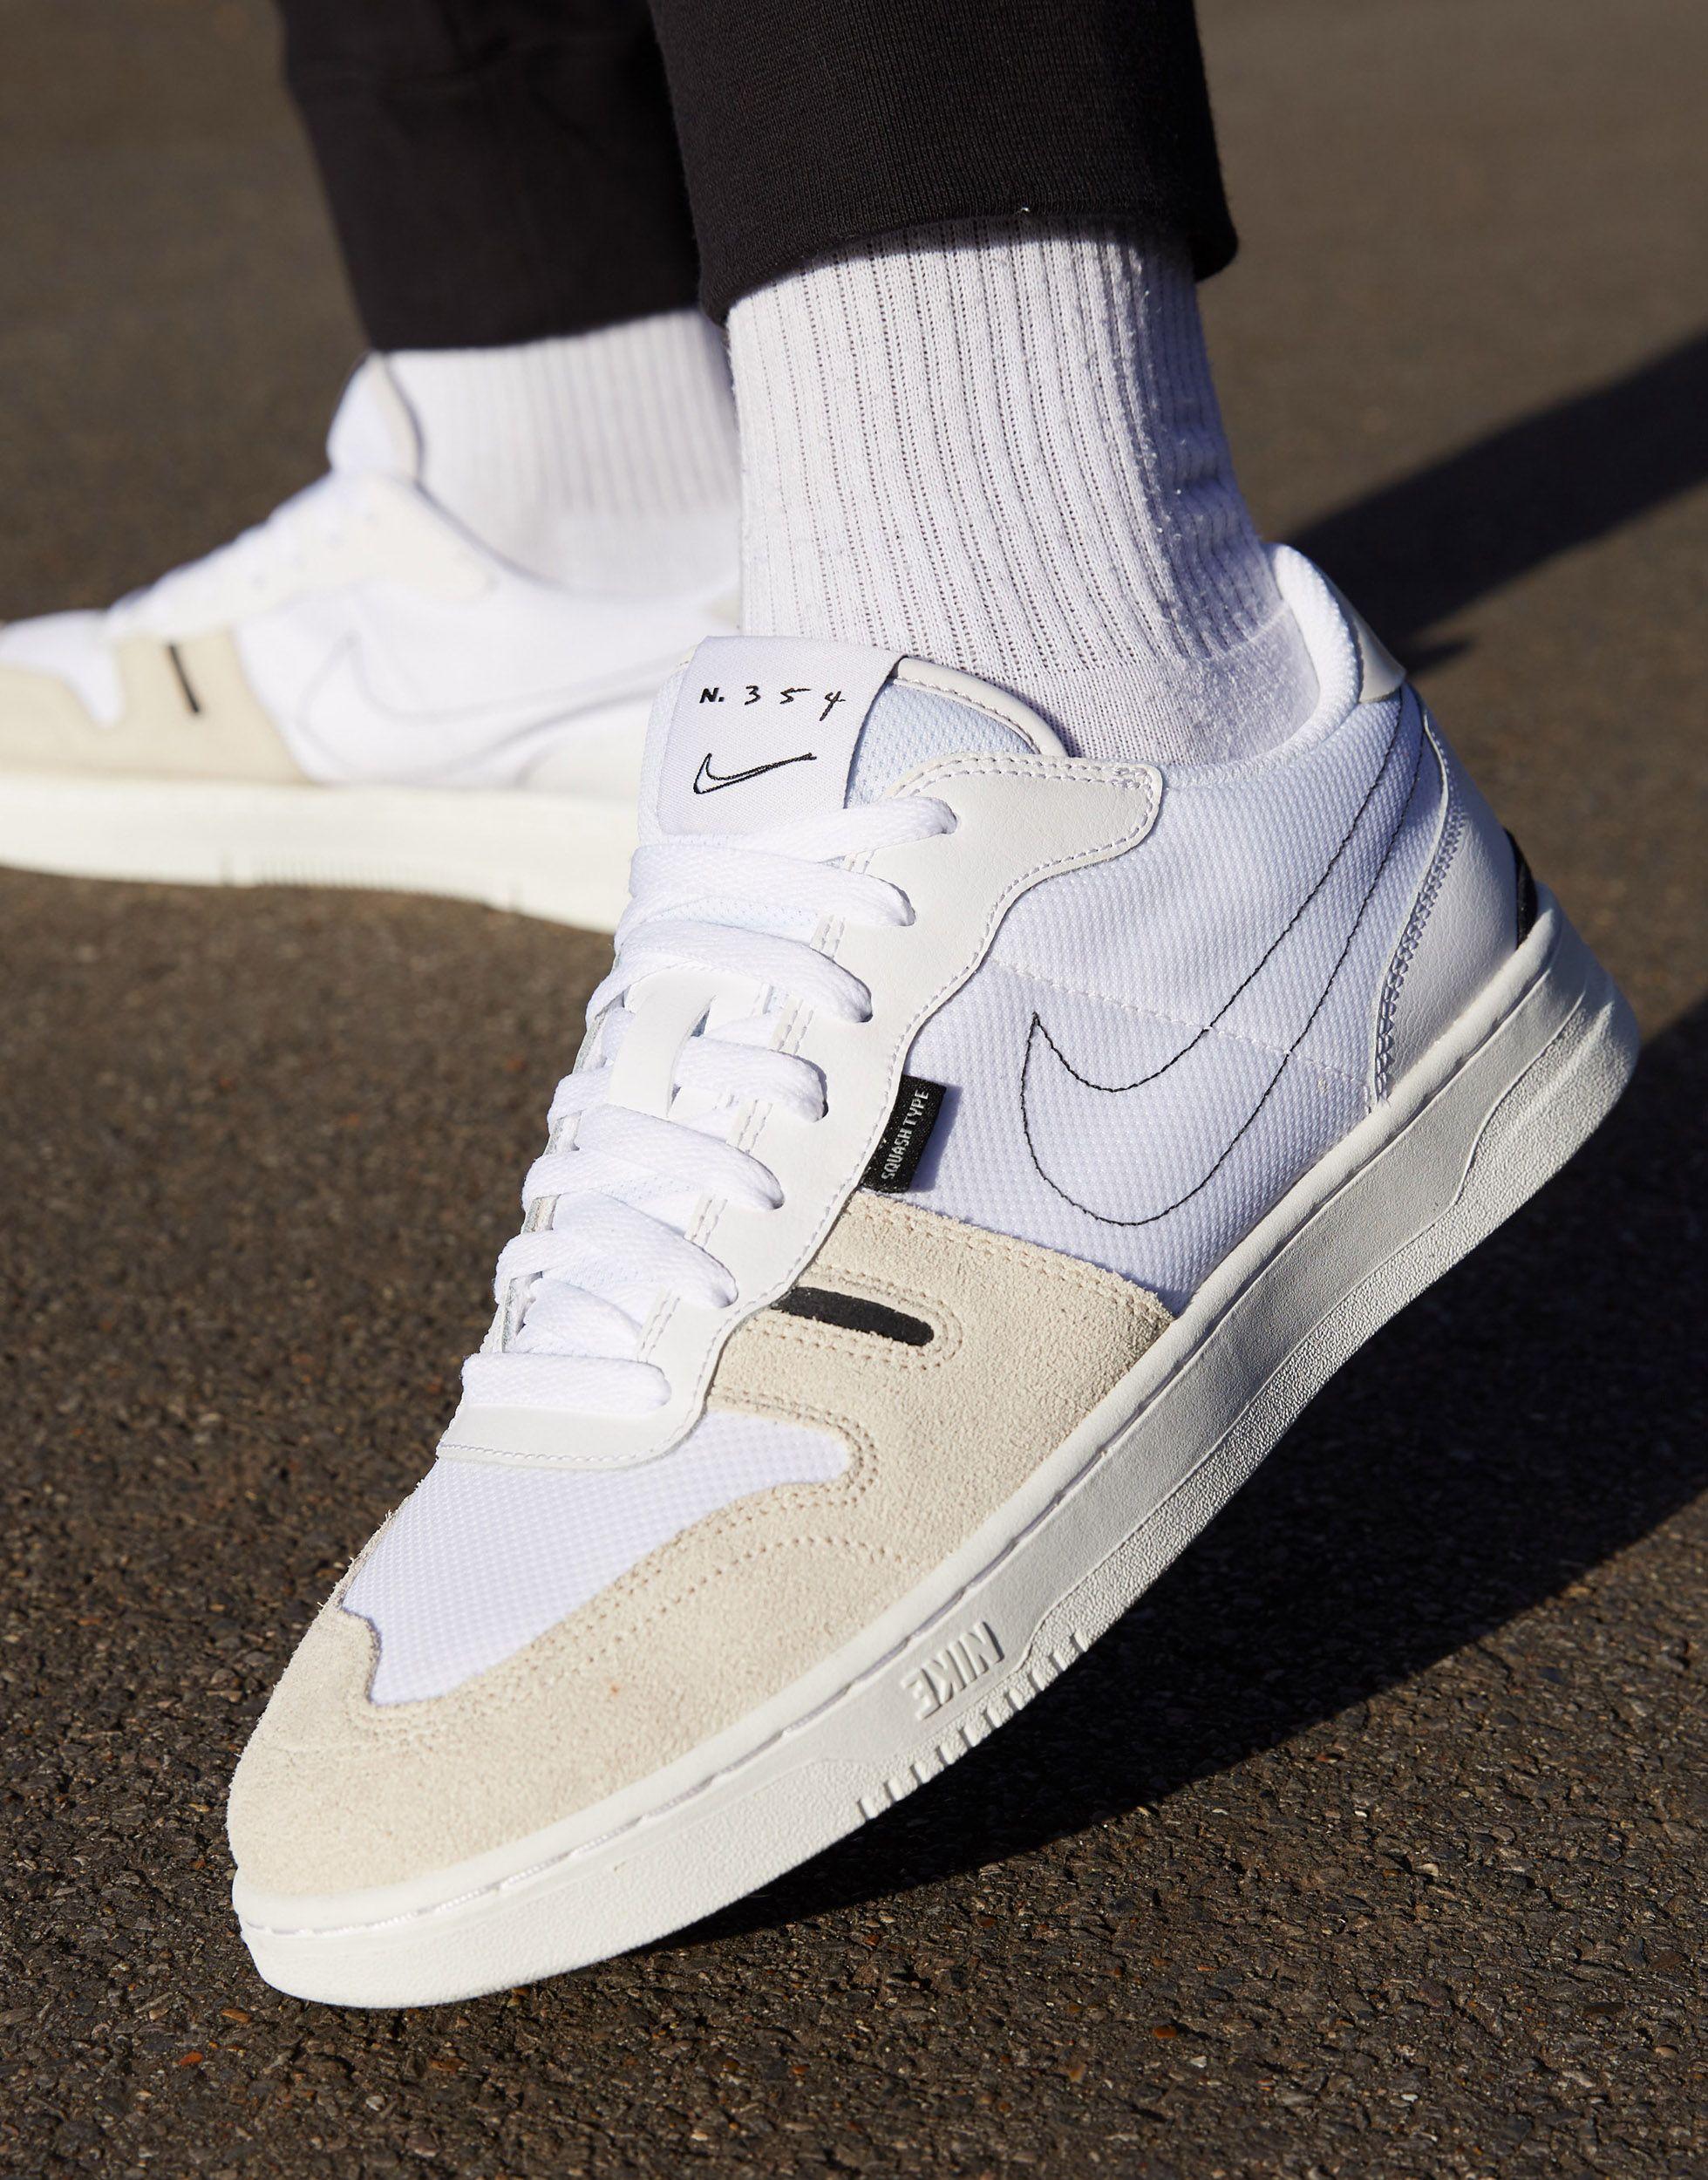 Nike Rubber Squash-type Sneakers in White for Men - Lyst